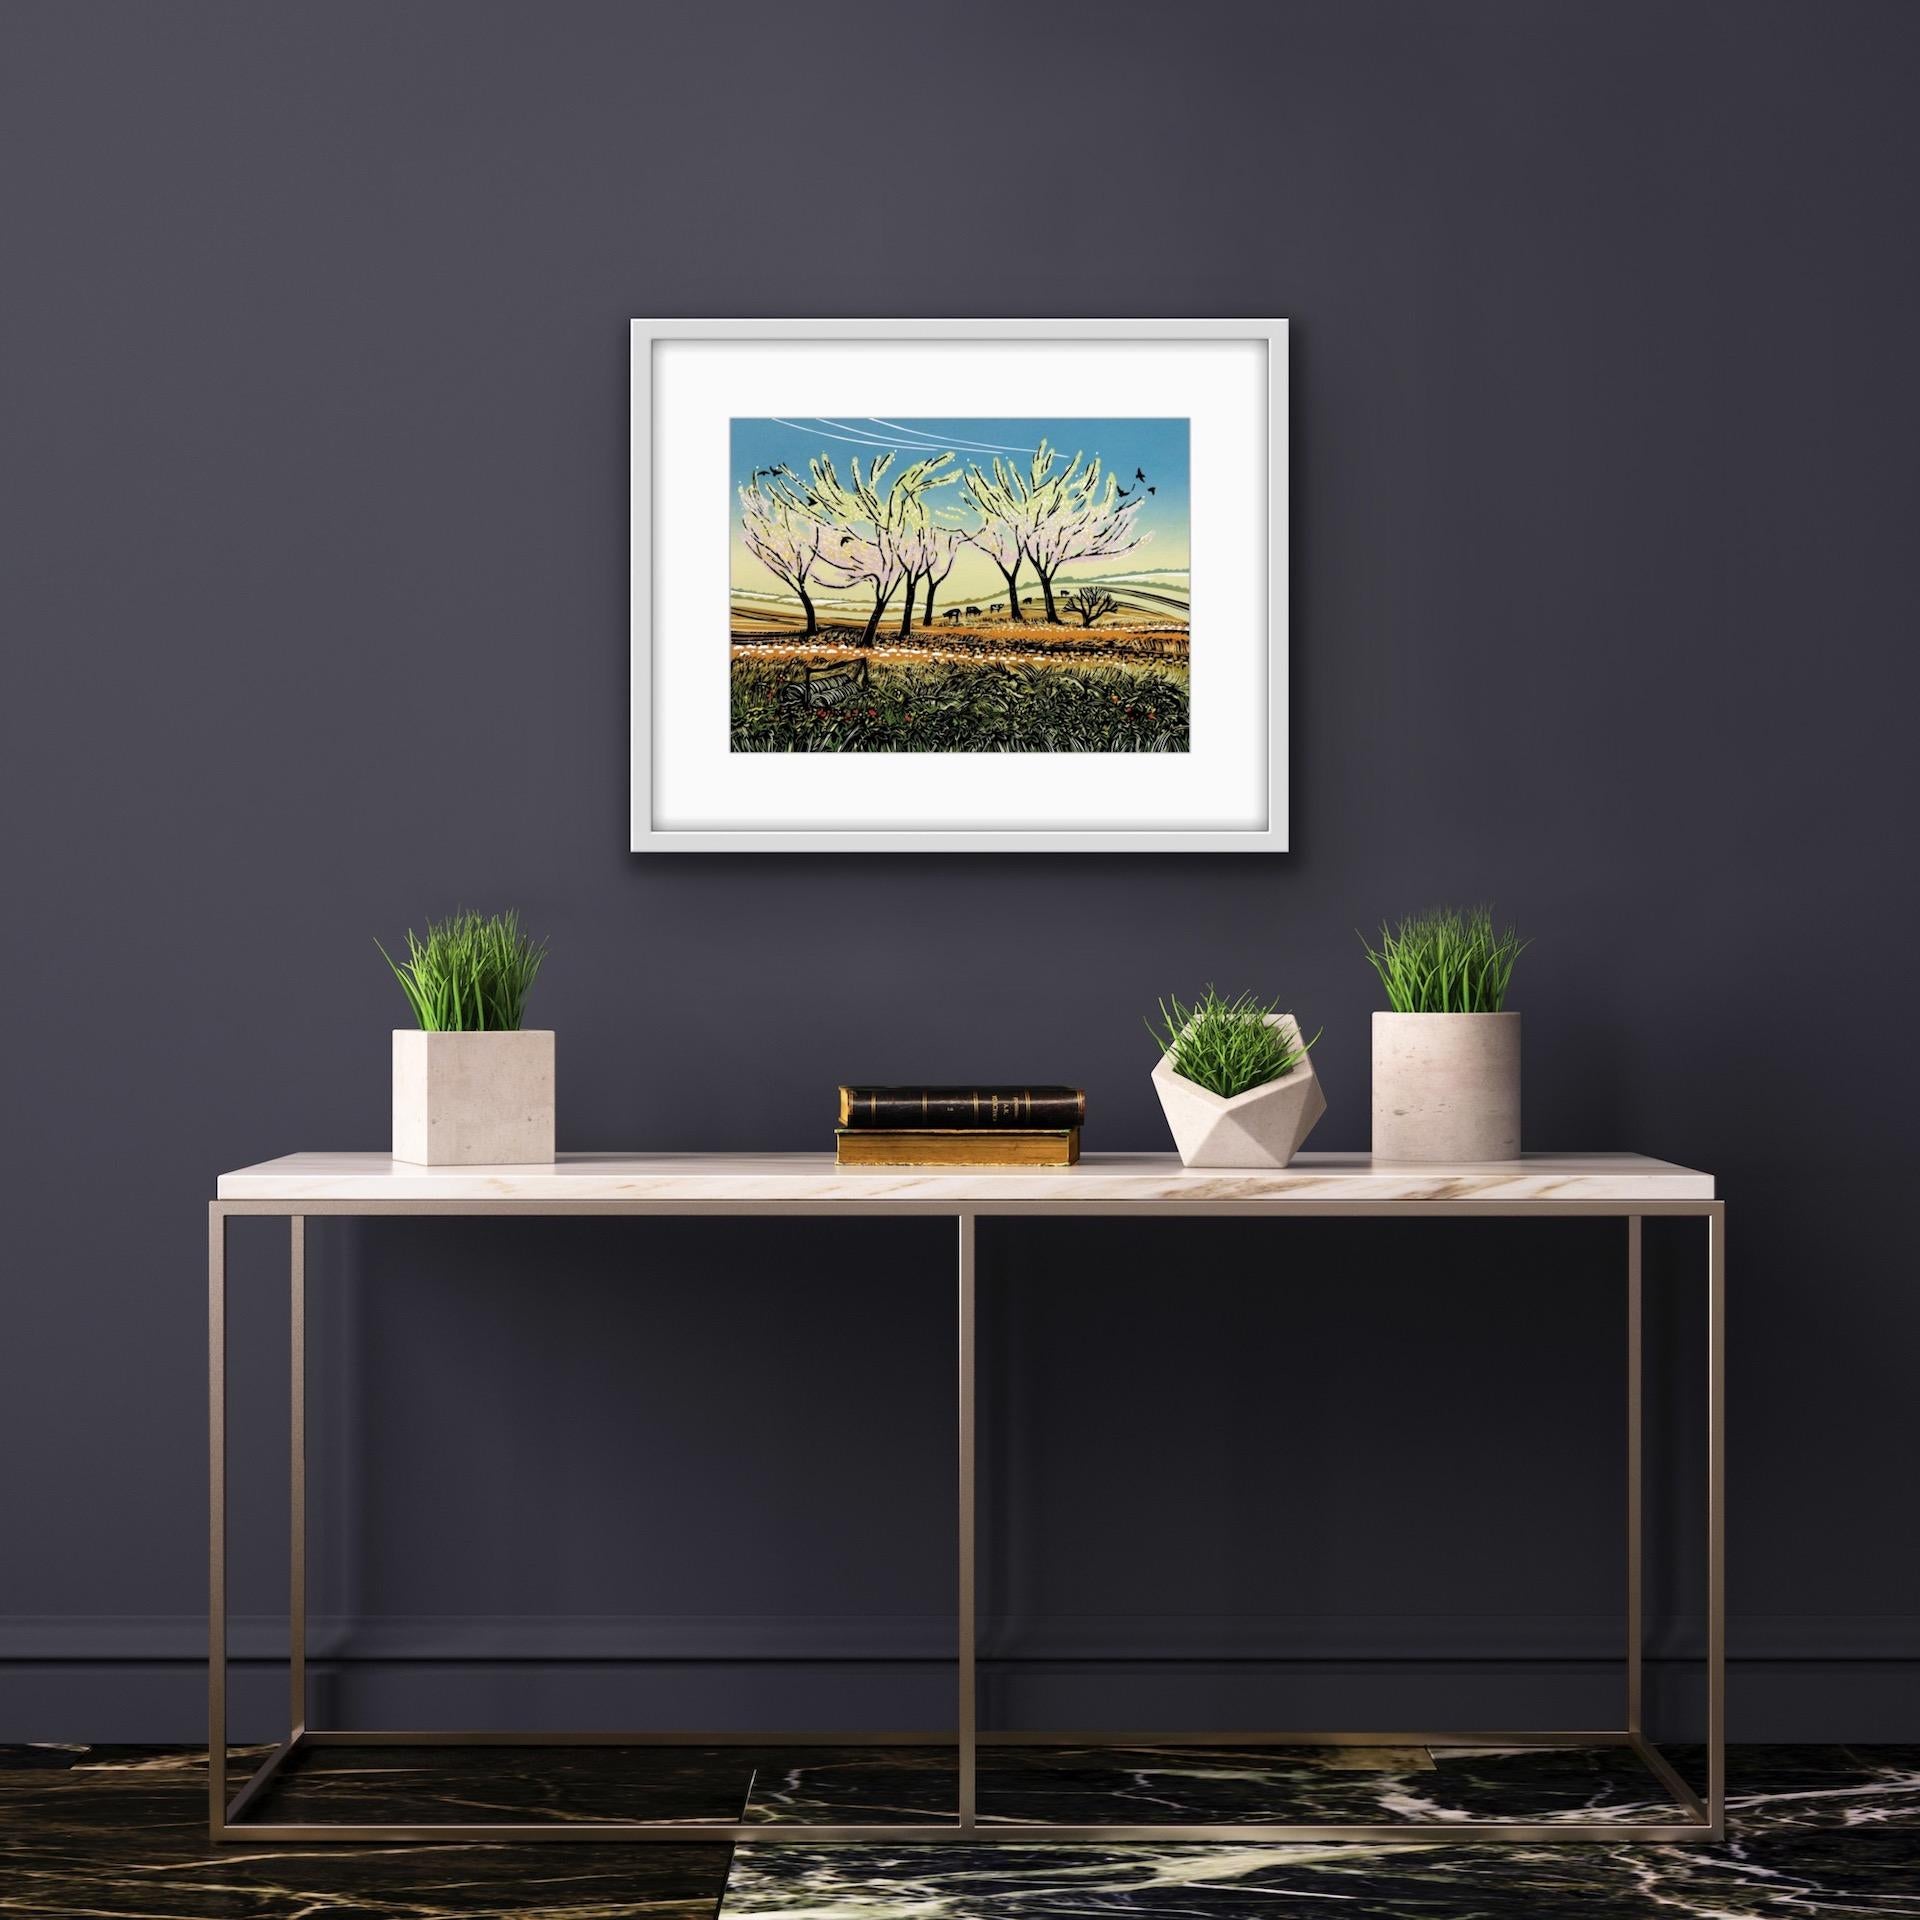 Rob Barnes, Blossom in the Wind, Limited Edition Landscape Print, Affordable Art 3